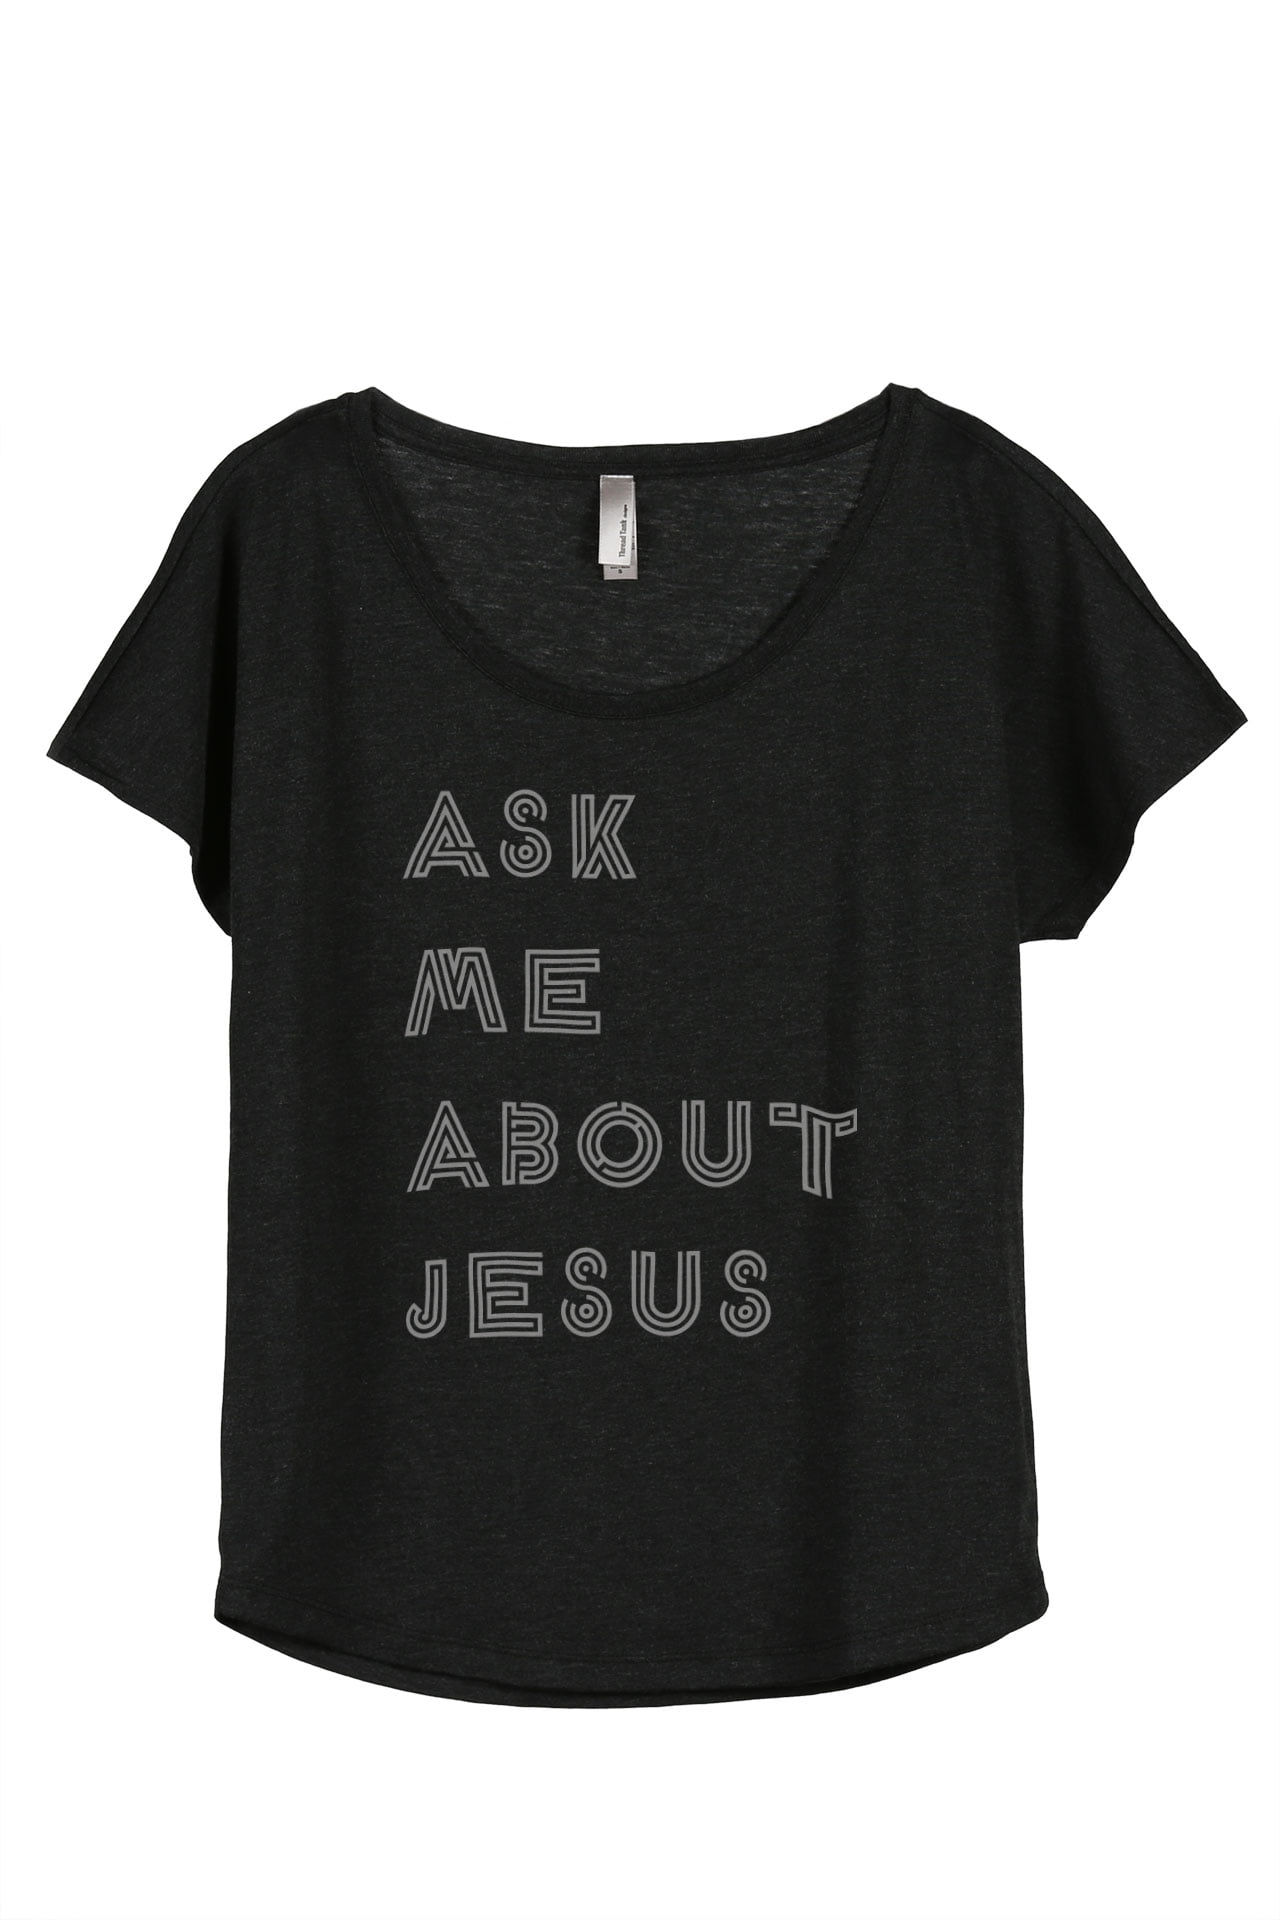 Thread Tank - Thread Tank Ask Me About Jesus Women's Relaxed Slouchy ...